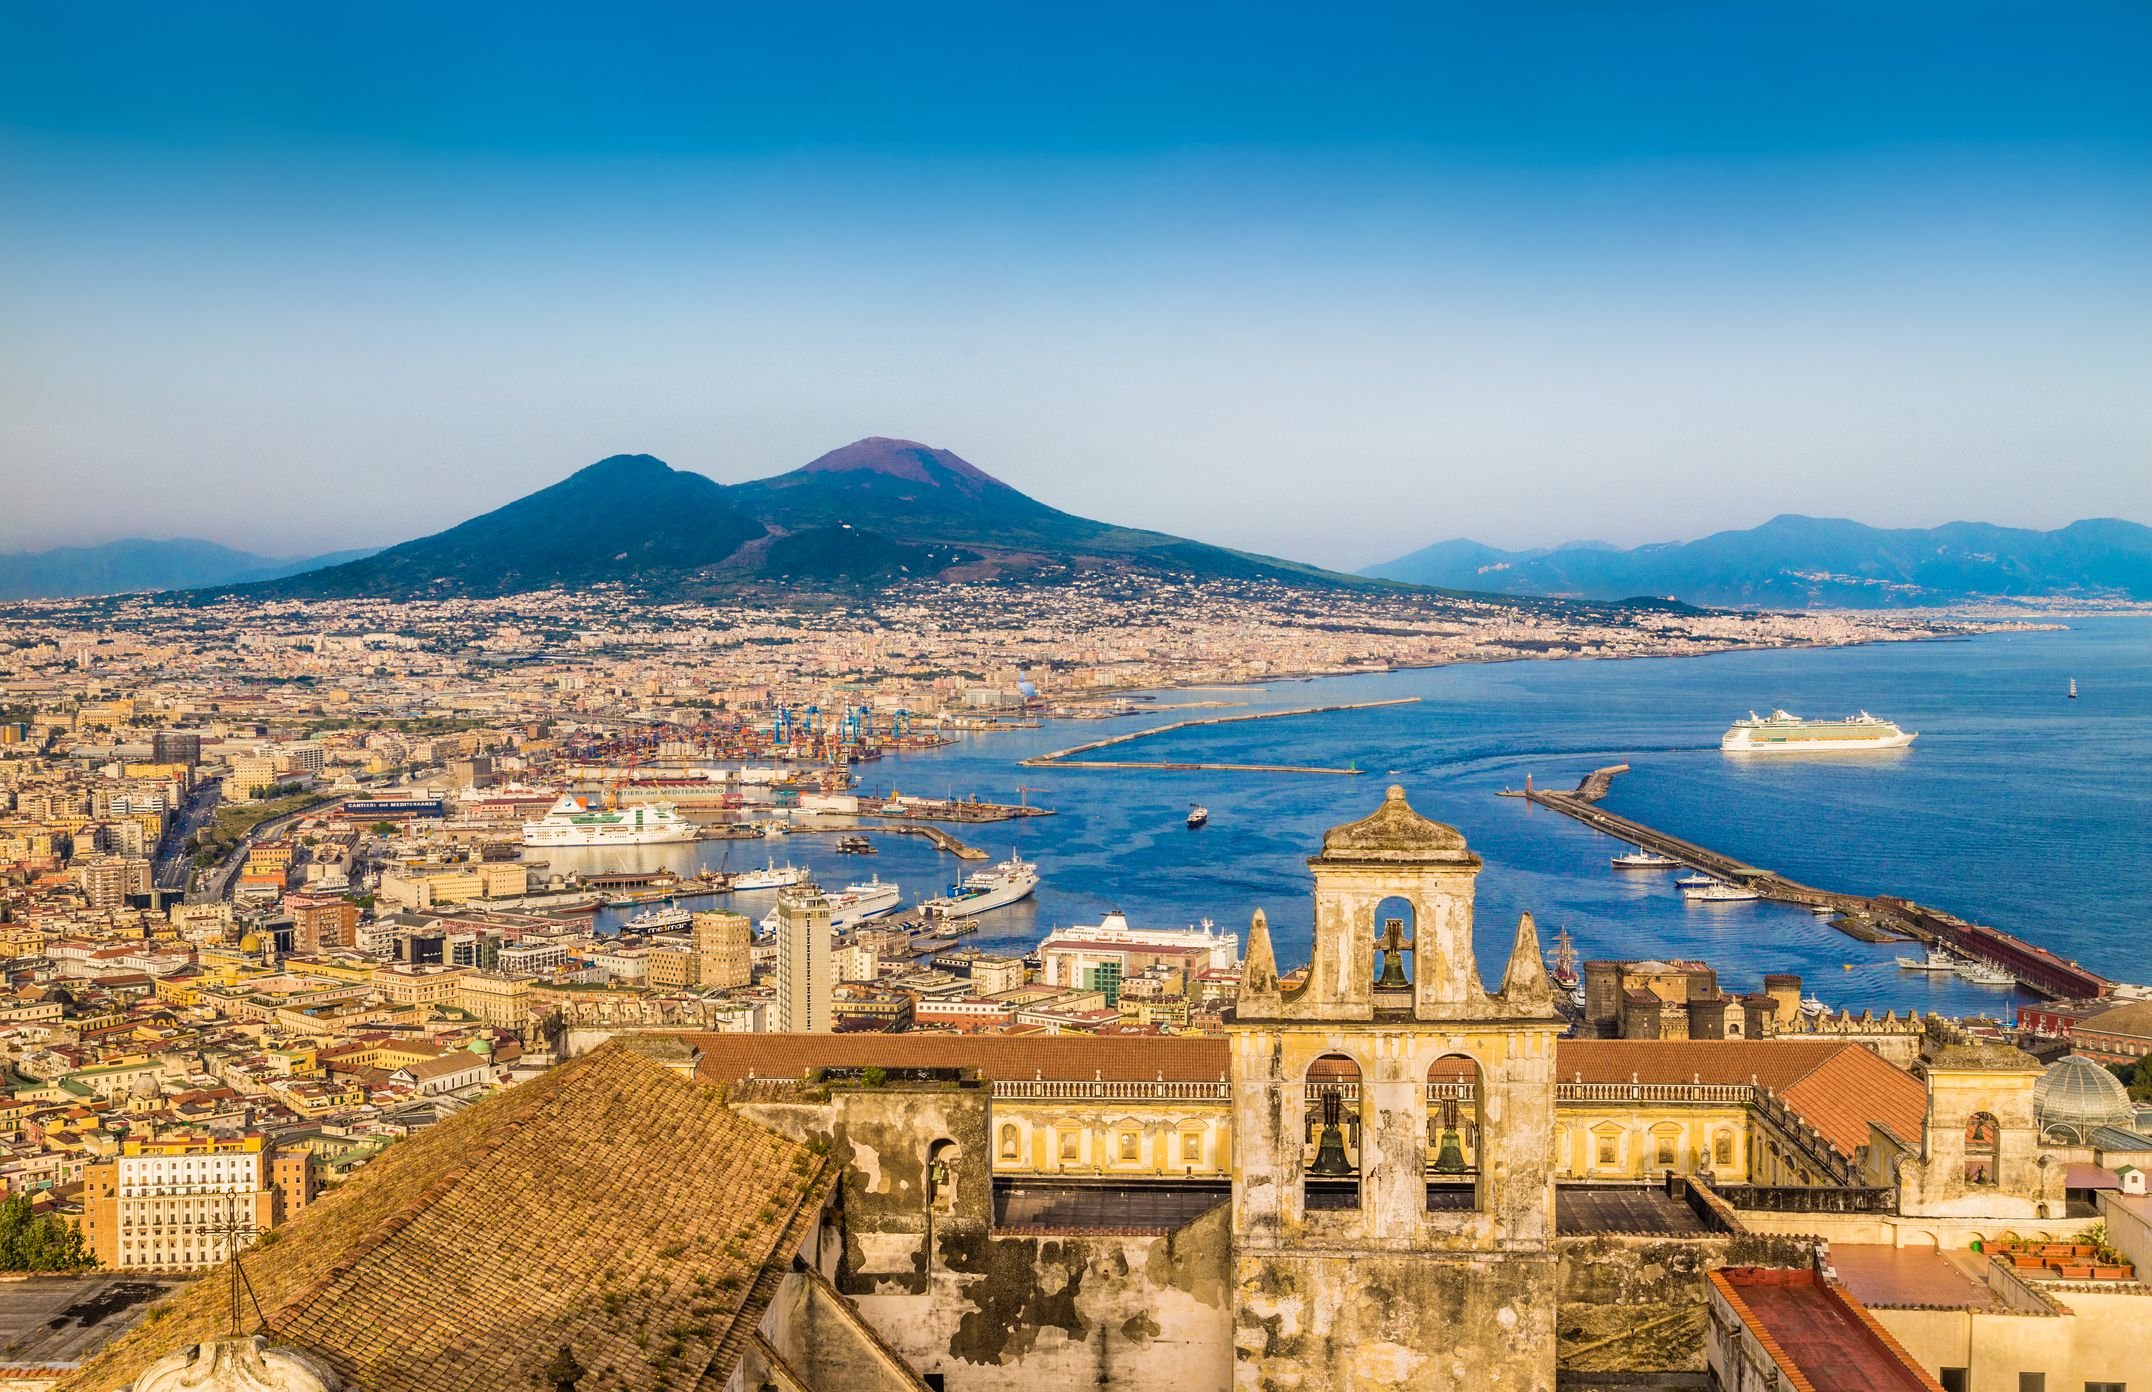 <p><b>Italy<br>Elevation:</b> 4,202 feet</p><p>Perhaps one of the most famous volcanoes in the world, Vesuvius is definitely one of those bucket list trips. Stop by the famous city of Pompeii <a href="https://www.visitpompeiivesuvius.com/en/vesuvius">before or after your hike up the mountain</a>, but make time to visit the nearby Herculaneum, a city that was destroyed by the same eruption as Pompeii.    </p><p><b>For more great travel guides and vacation tips,</b> <a href="https://cheapism.us14.list-manage.com/subscribe?u=de966e79b38e1d833d5781074&id=c14db36dd0">please sign up for our free newsletters</a>. </p>